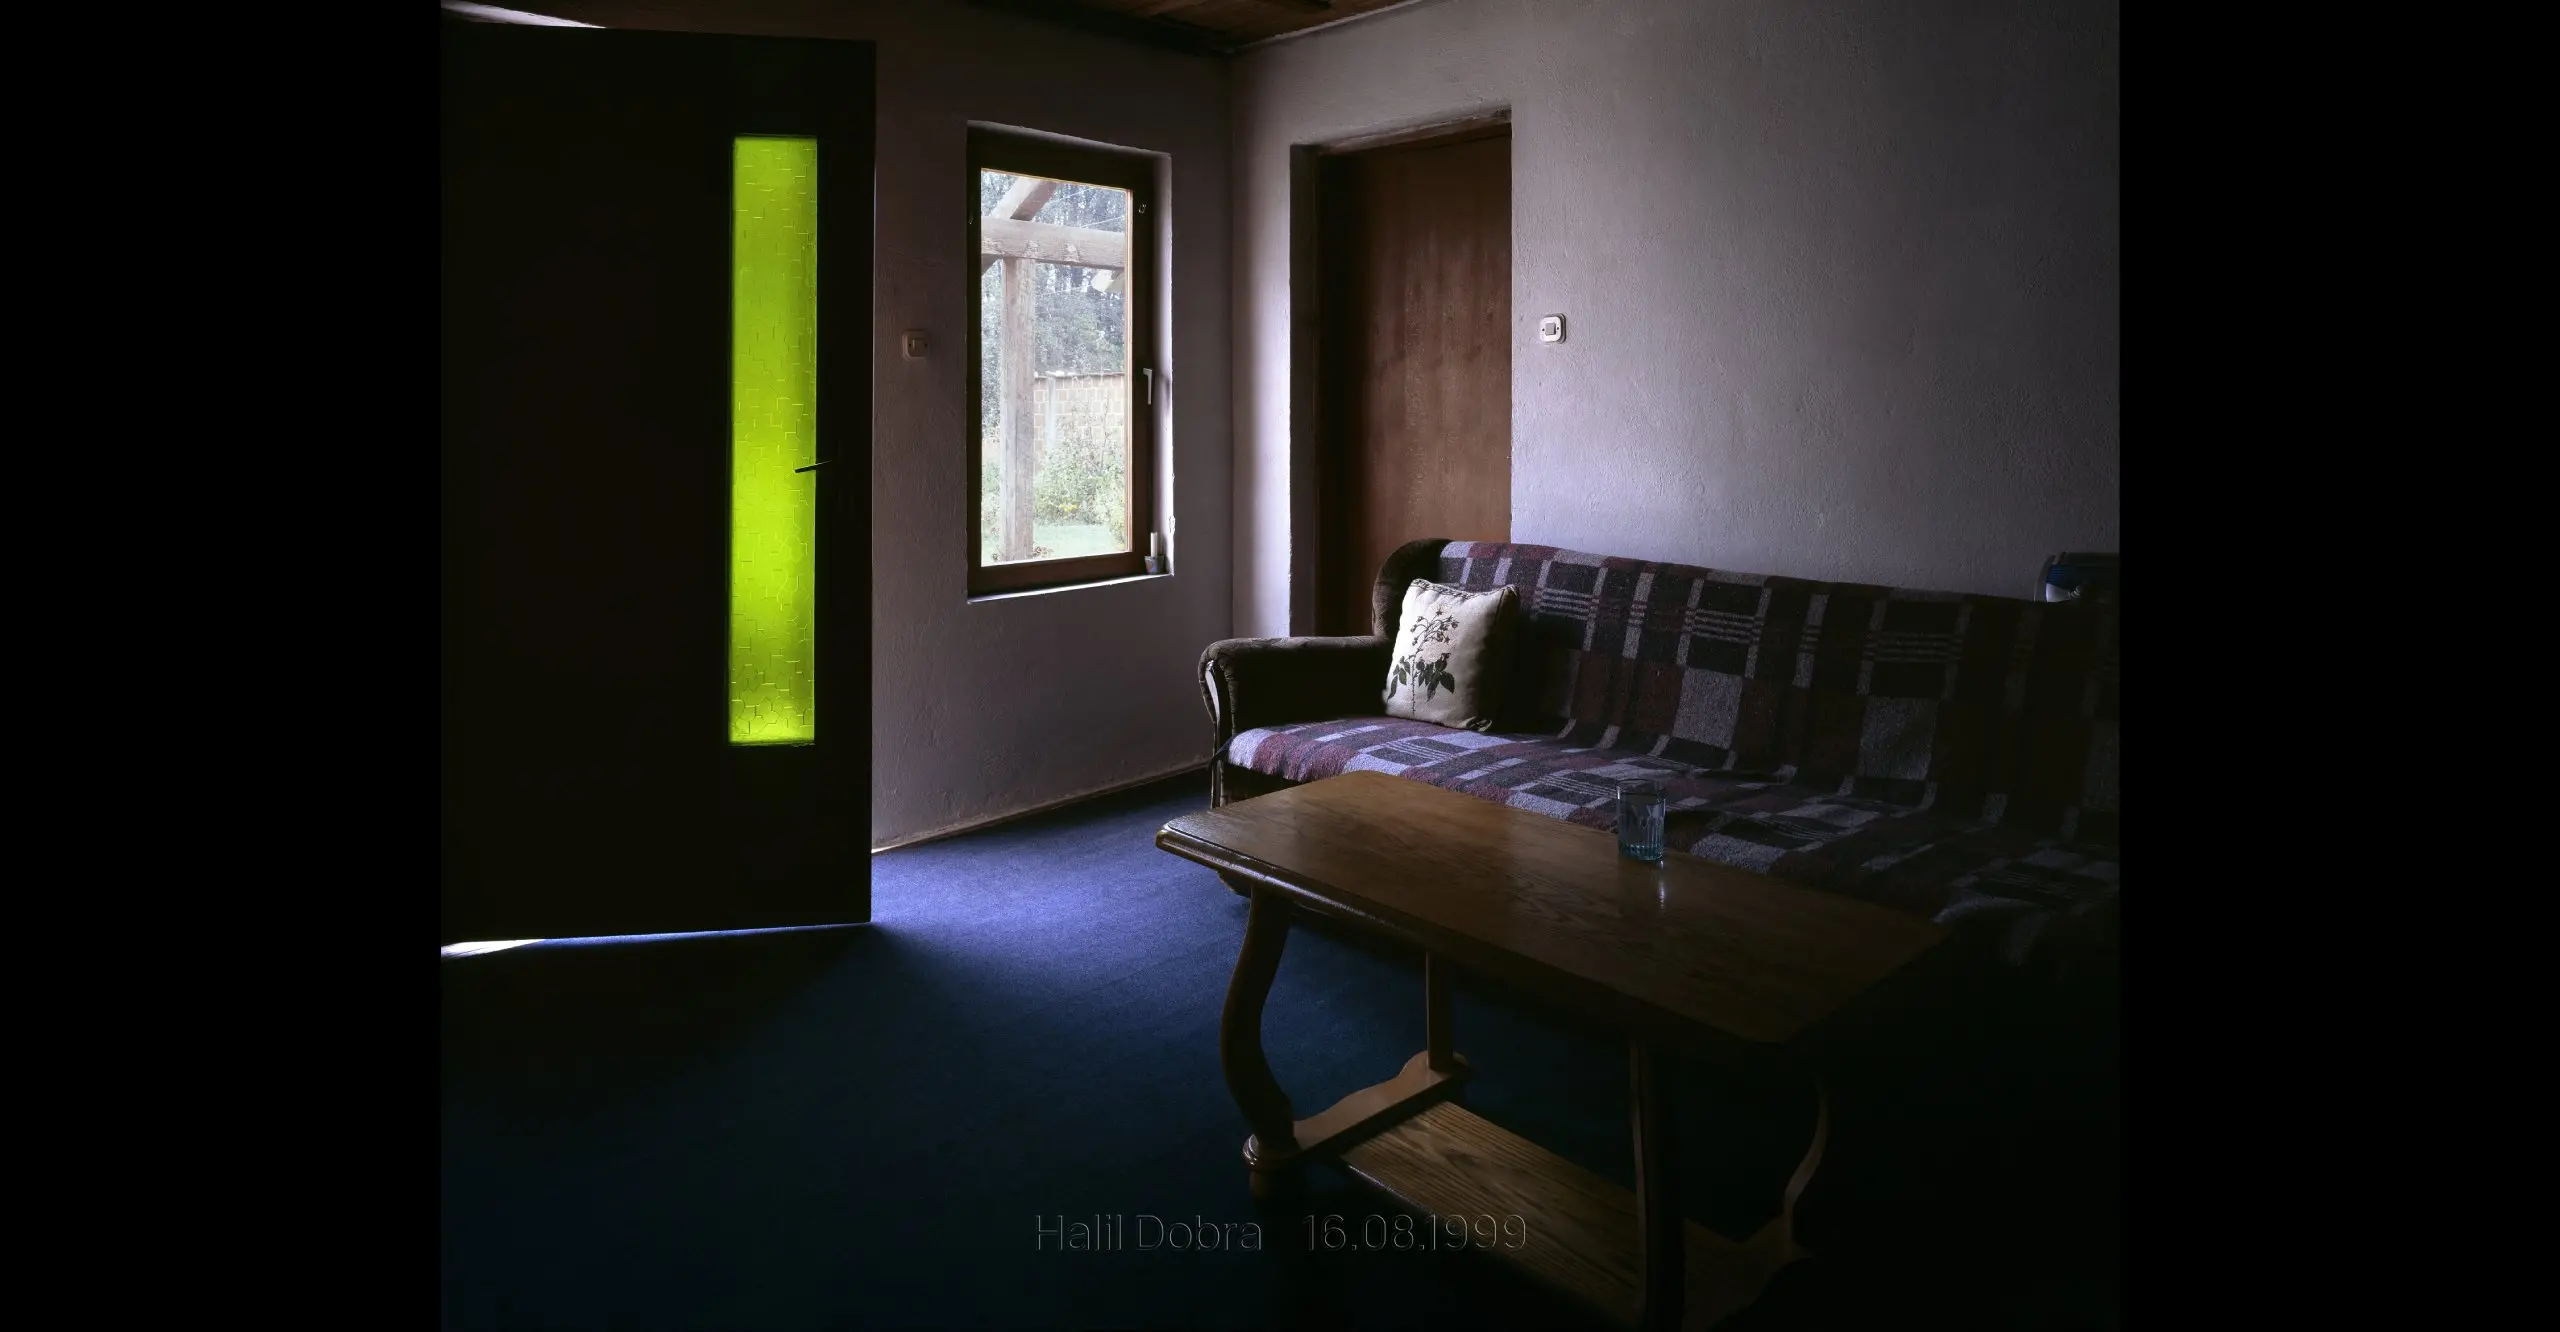 Colour photograph of a darkened room  with a sofa, table and a door with green glass, the image  states ‘Halil Dobra 16.08.1999’